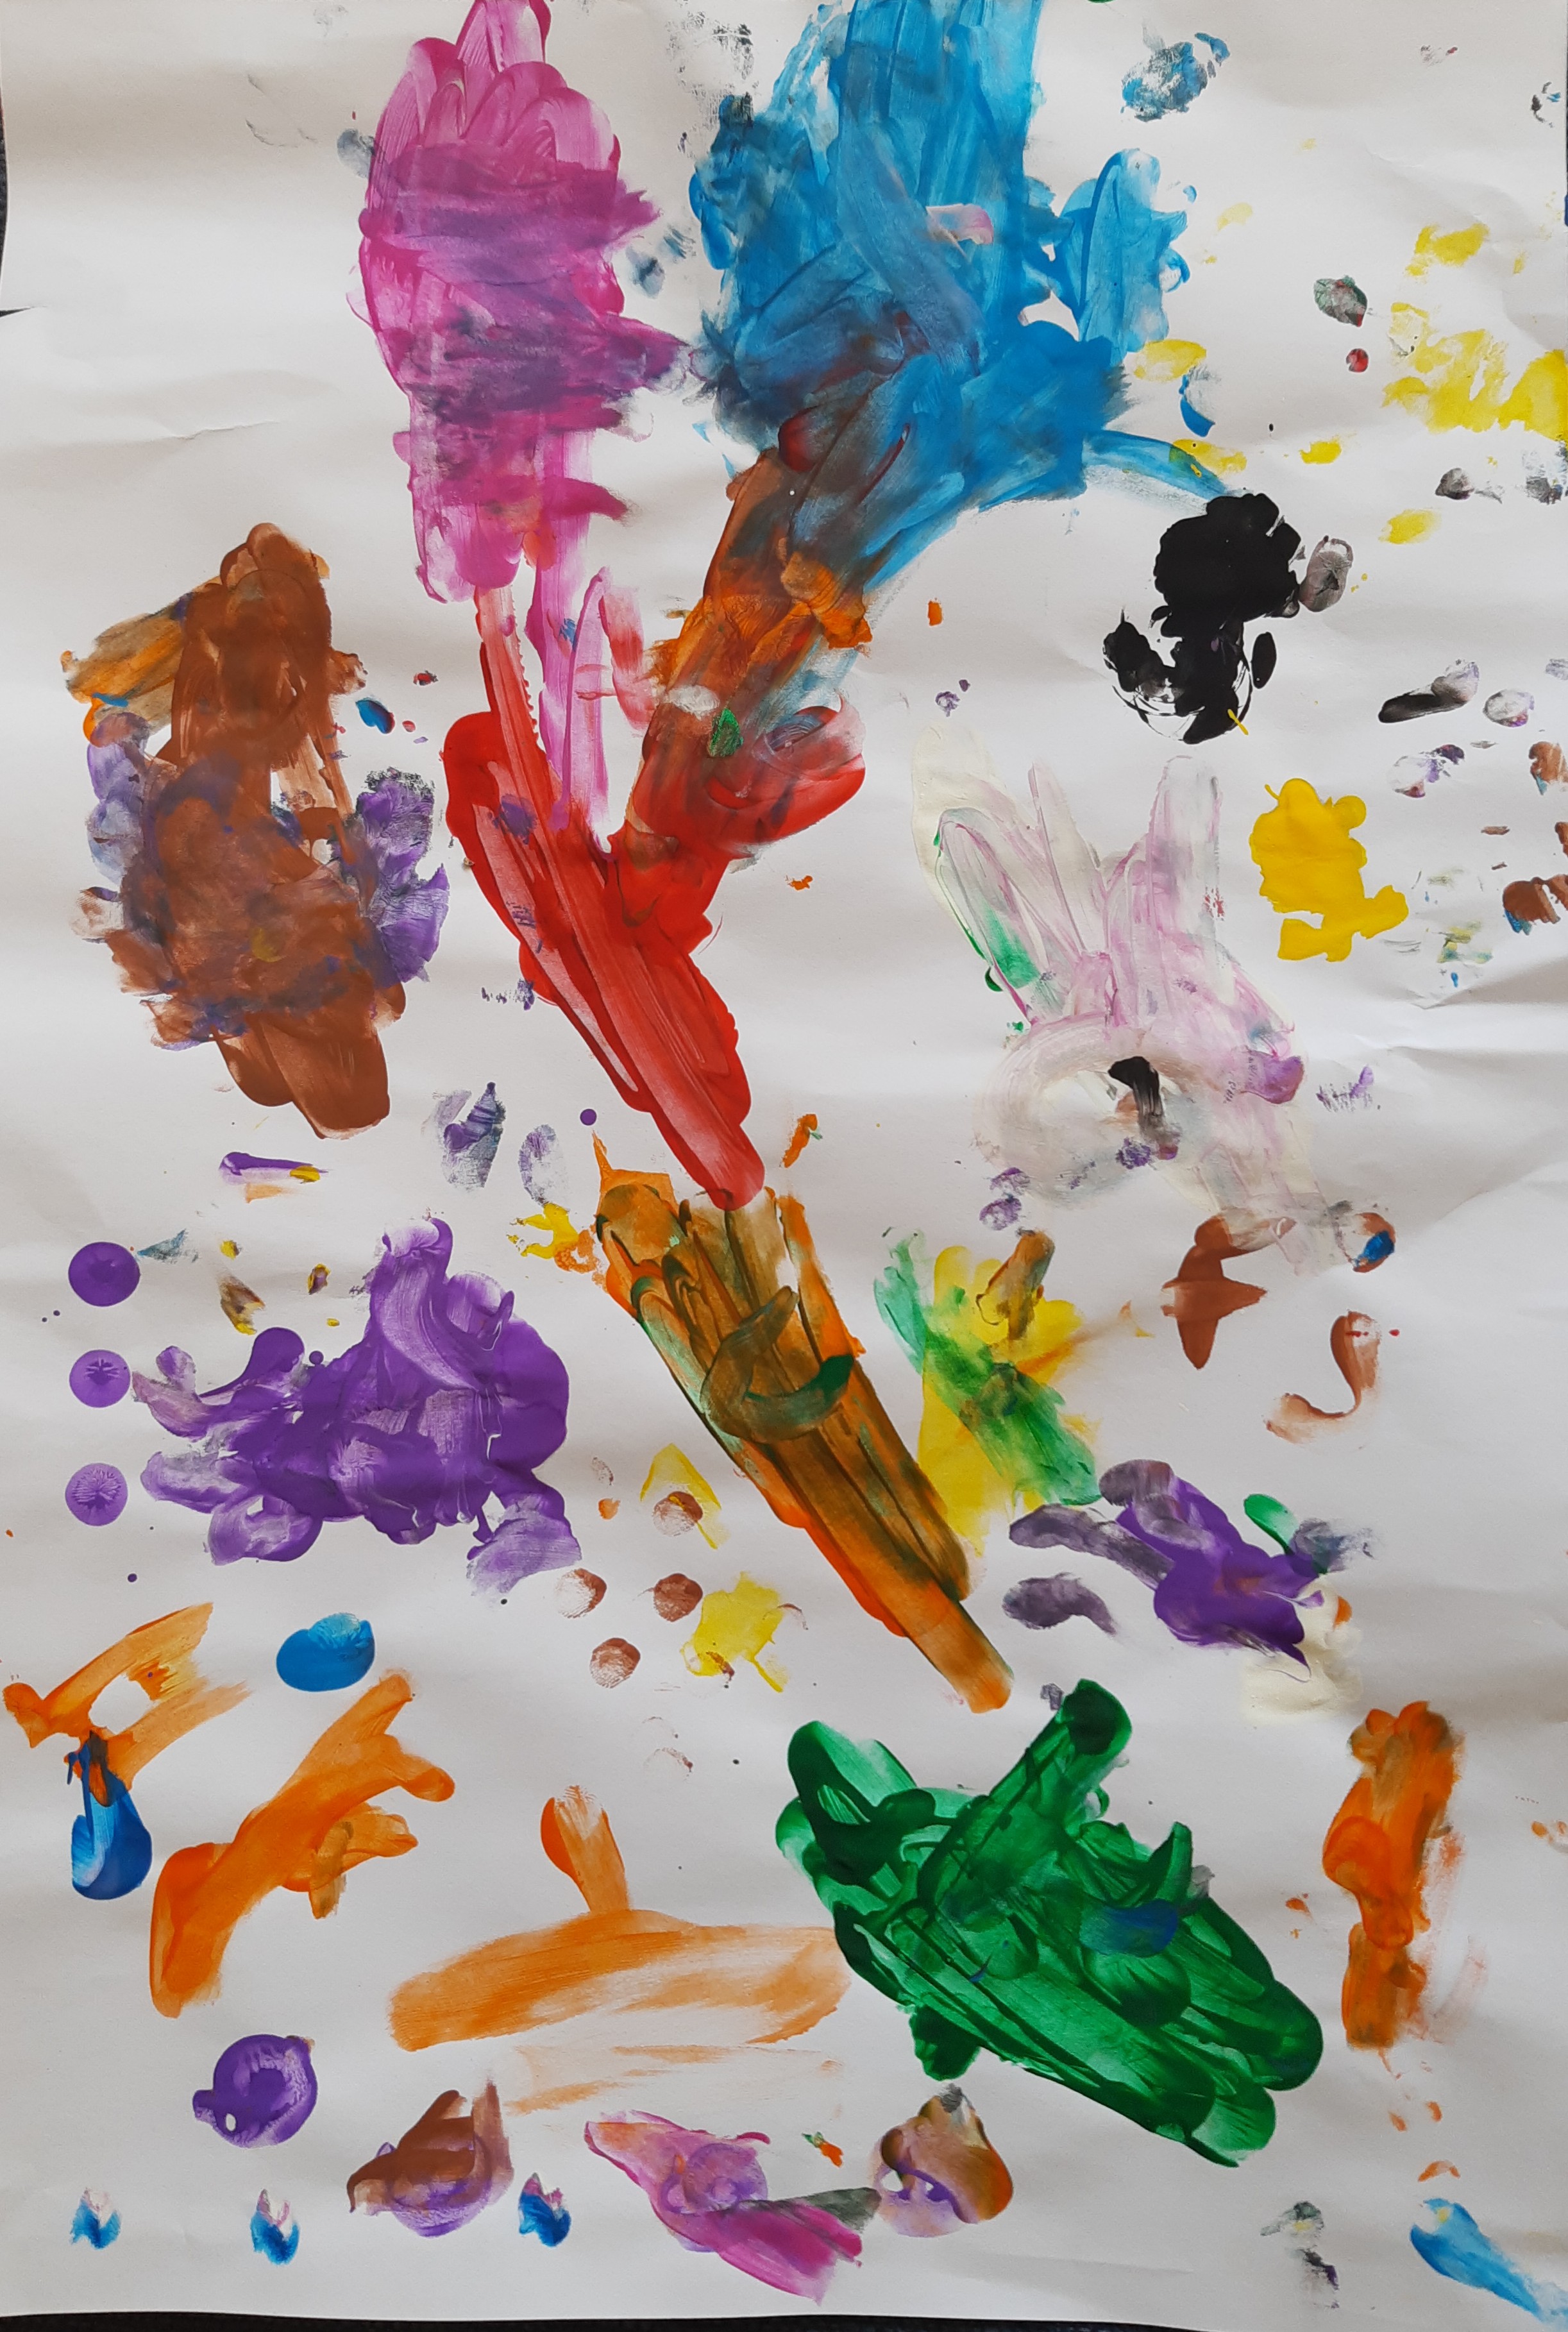 'The chaos of 2020' by Finn (2) from Limerick